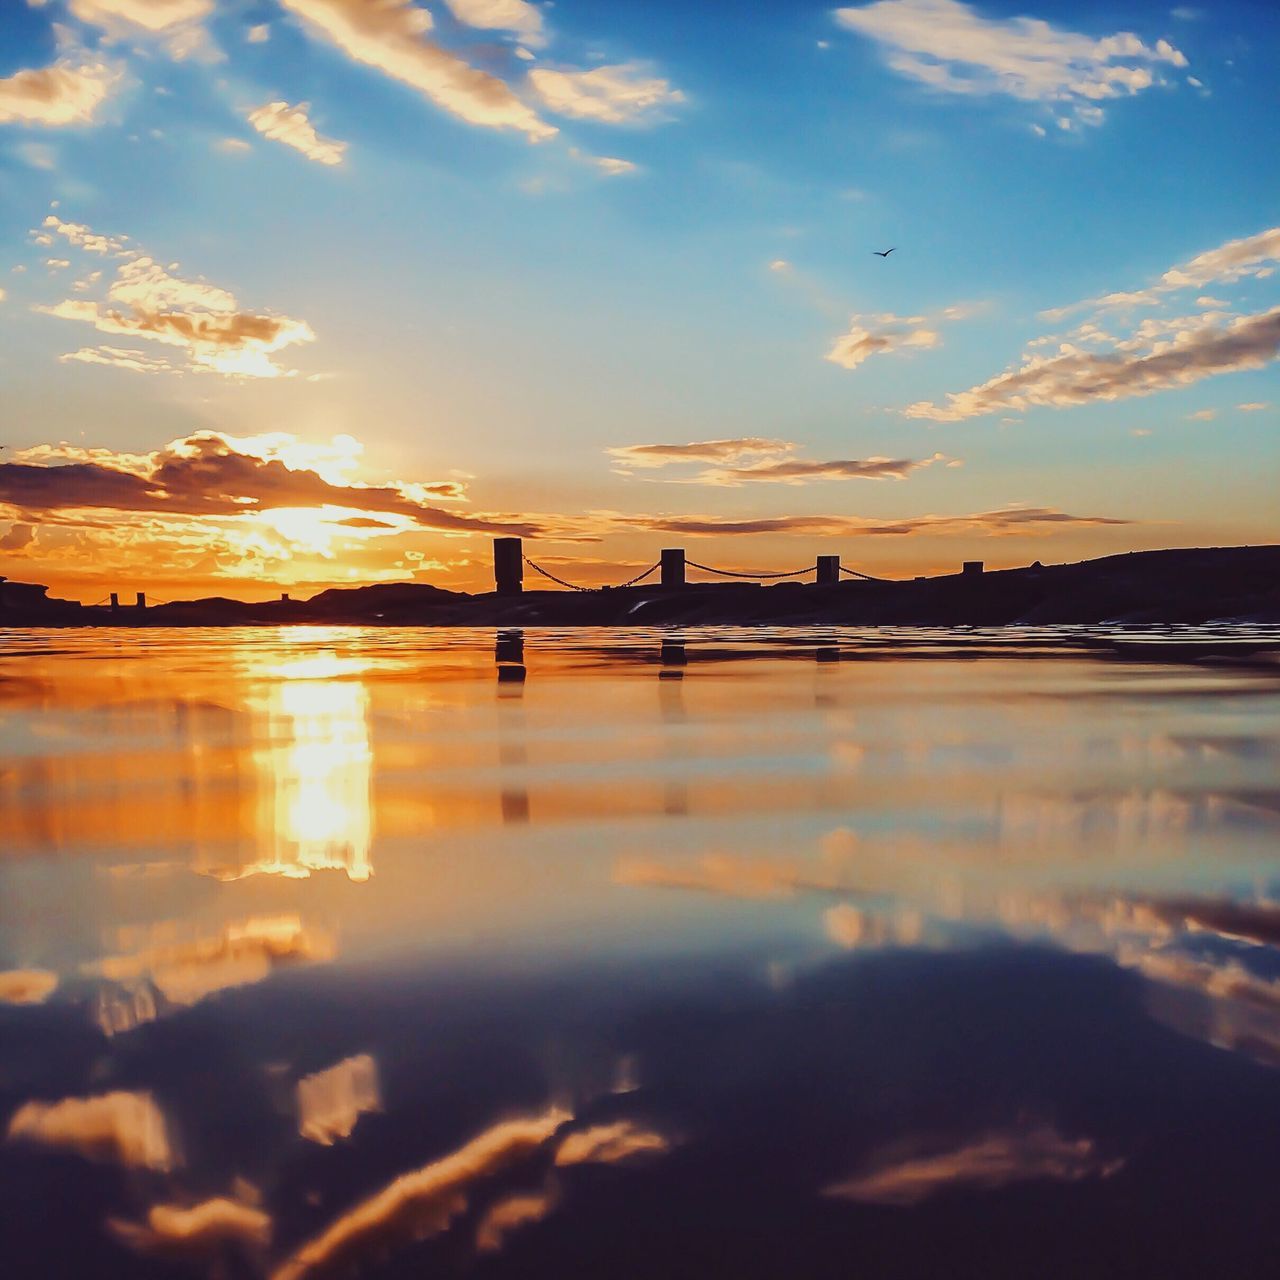 sunset, water, reflection, tranquil scene, scenics, tranquility, sun, idyllic, lake, sky, waterfront, cloud - sky, river, bridge - man made structure, calm, beauty in nature, cloud, nature, orange color, standing water, outdoors, sea, surface level, majestic, ocean, bridge, no people, remote